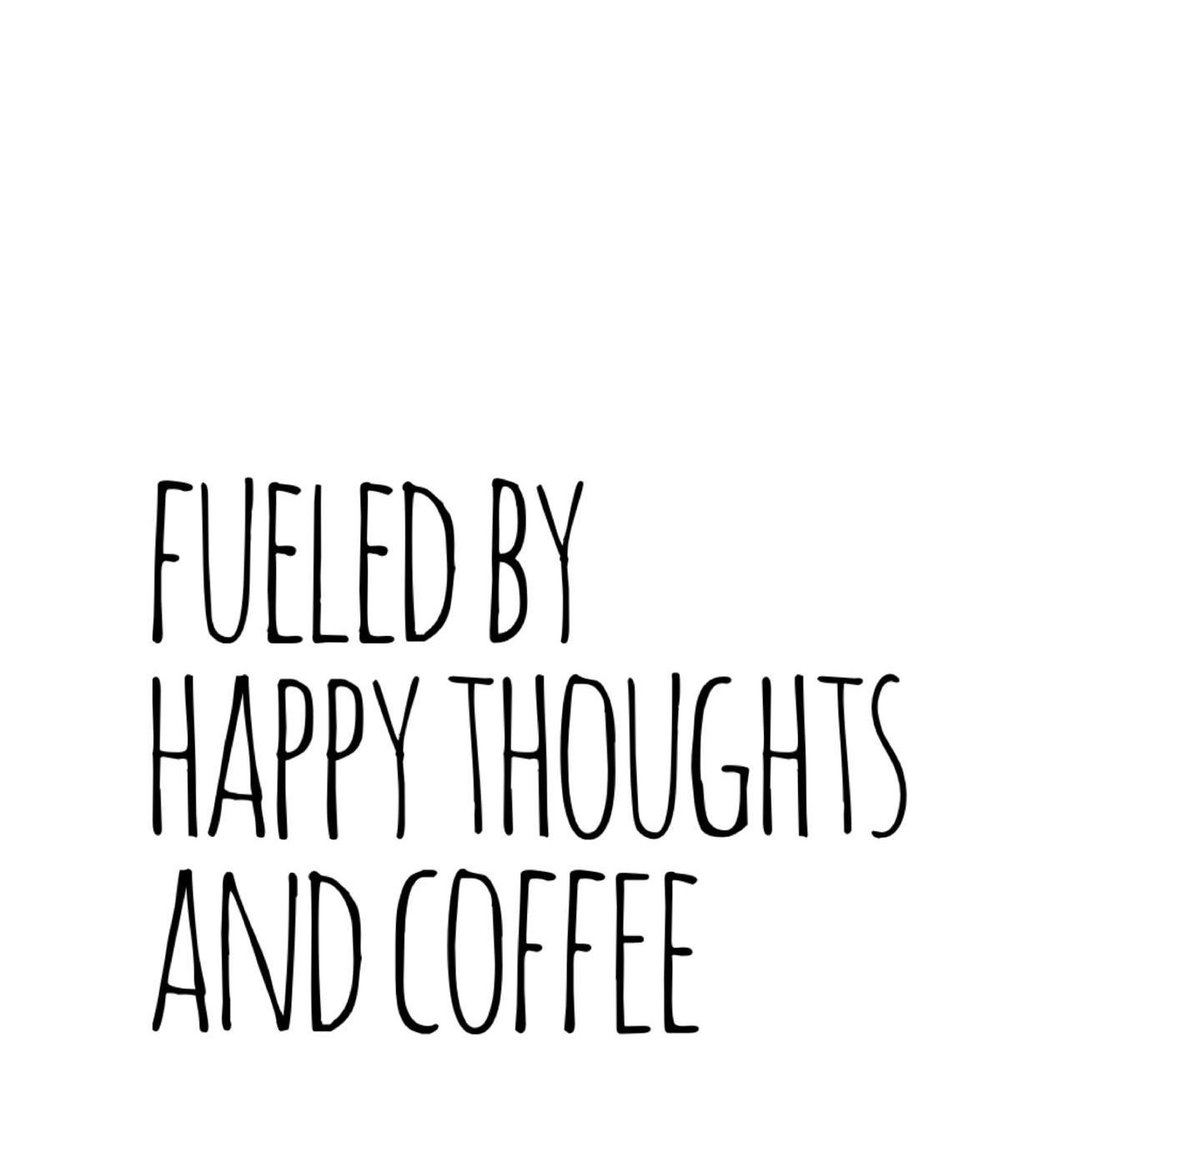 Happy Friday, everyone! May your coffee be strong and your day be smooth 🤞☕️

 #yycnow #yycevents #yycentrepreneur #yycbiz #businesssuccess #businessfailure